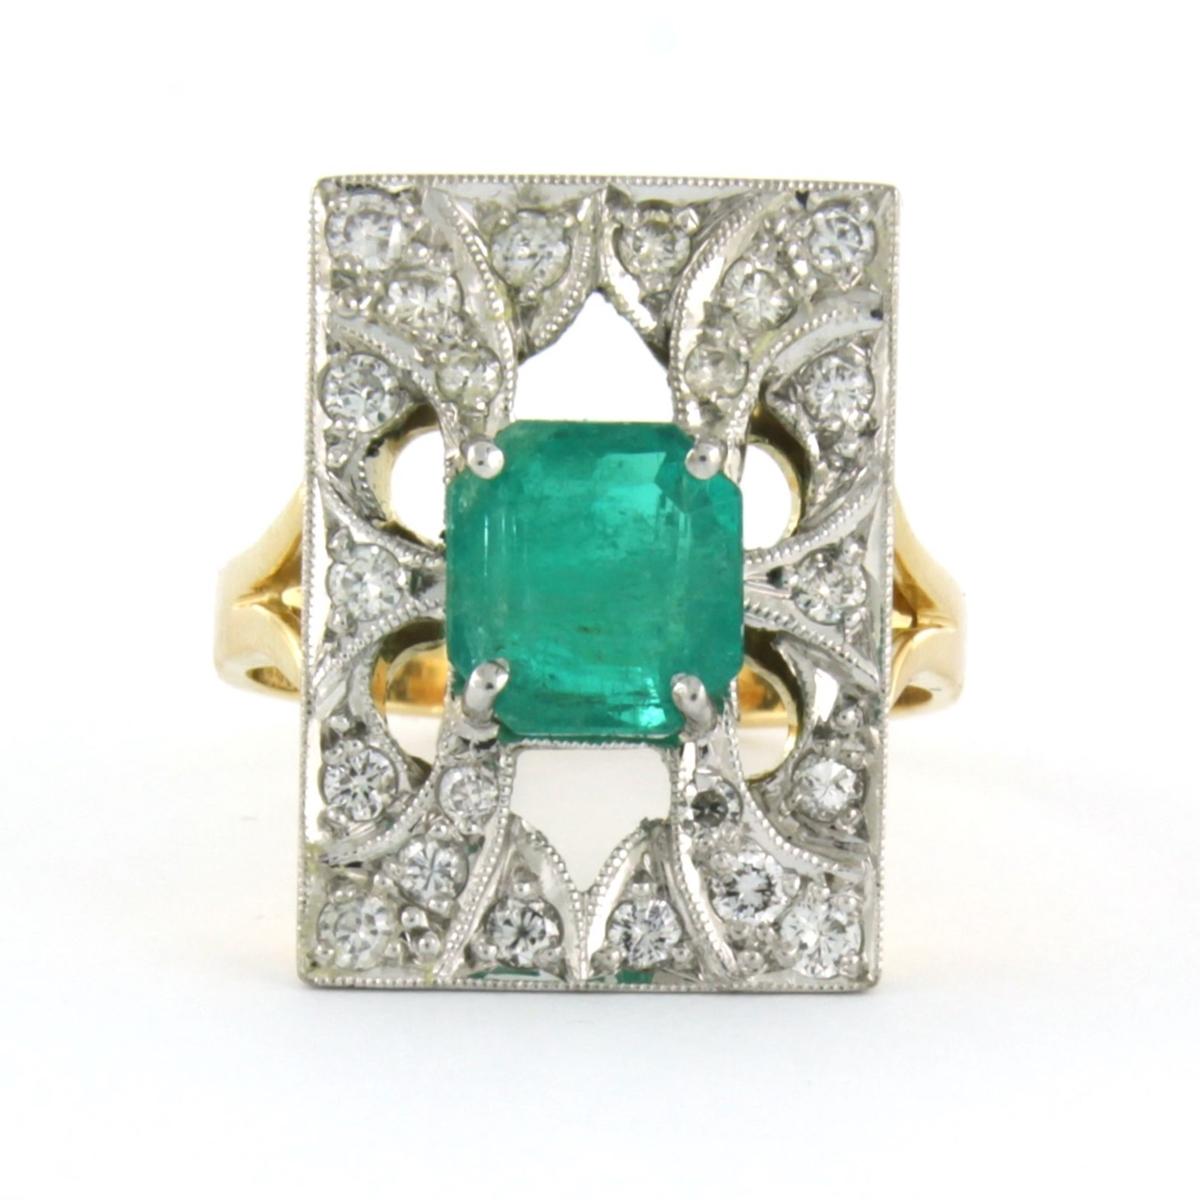 18k bicolor gold ring set with emerald. 2.80ct and brilliant cut diamond up to. 0.50ct - F/G - VS/SI - ring size U.S. 8.25 - EU. 18.5(58)

detailed description:

the top of the ring is 2.1 cm wide by 6.9 mm high

weight 8.3 grams

ring size U.S.